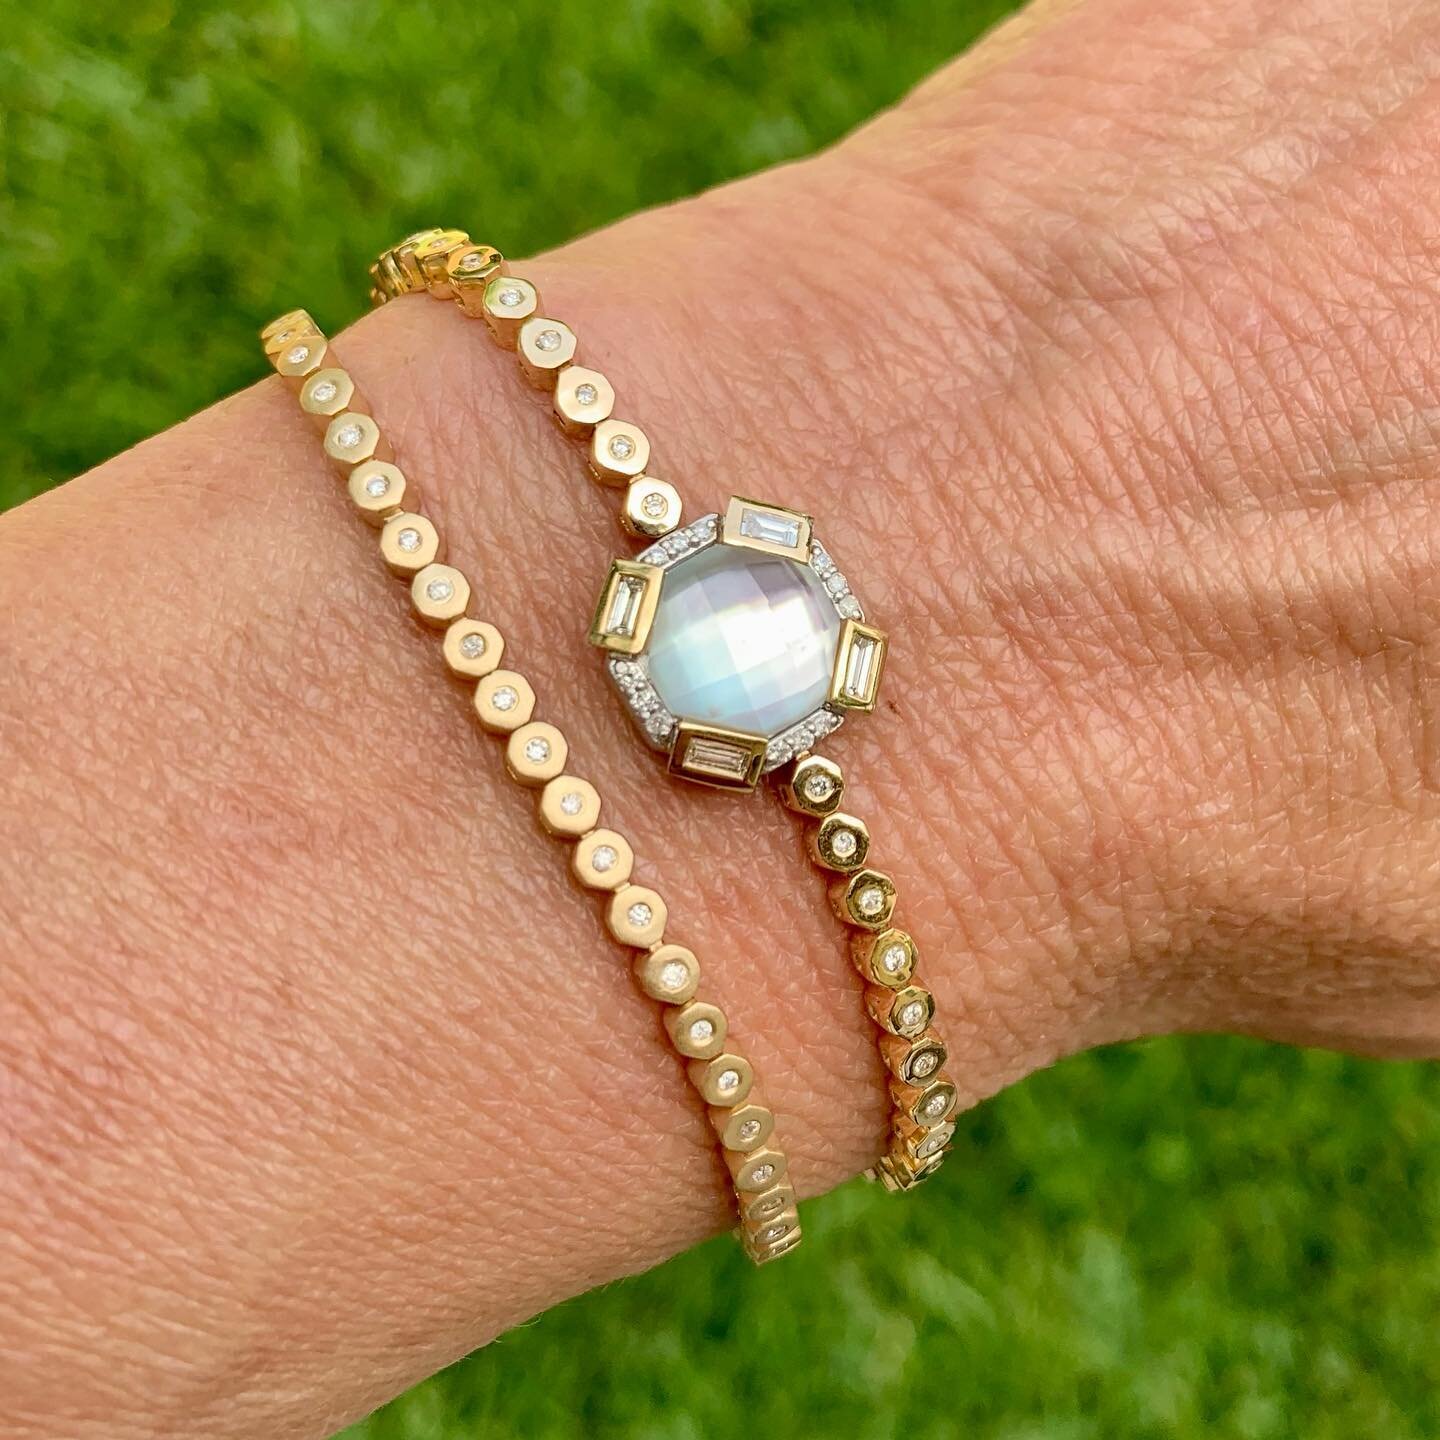 Great to wear on its own or stacked with some of your other favorites&hellip; 

Swipe to see the closure!
.
.
.
.
#bolobracelets #bracelets #braceletstacks #summervibes #Summer jewelry #SummerJewelryTrends #Diamonds #Sparkle#14karatgold